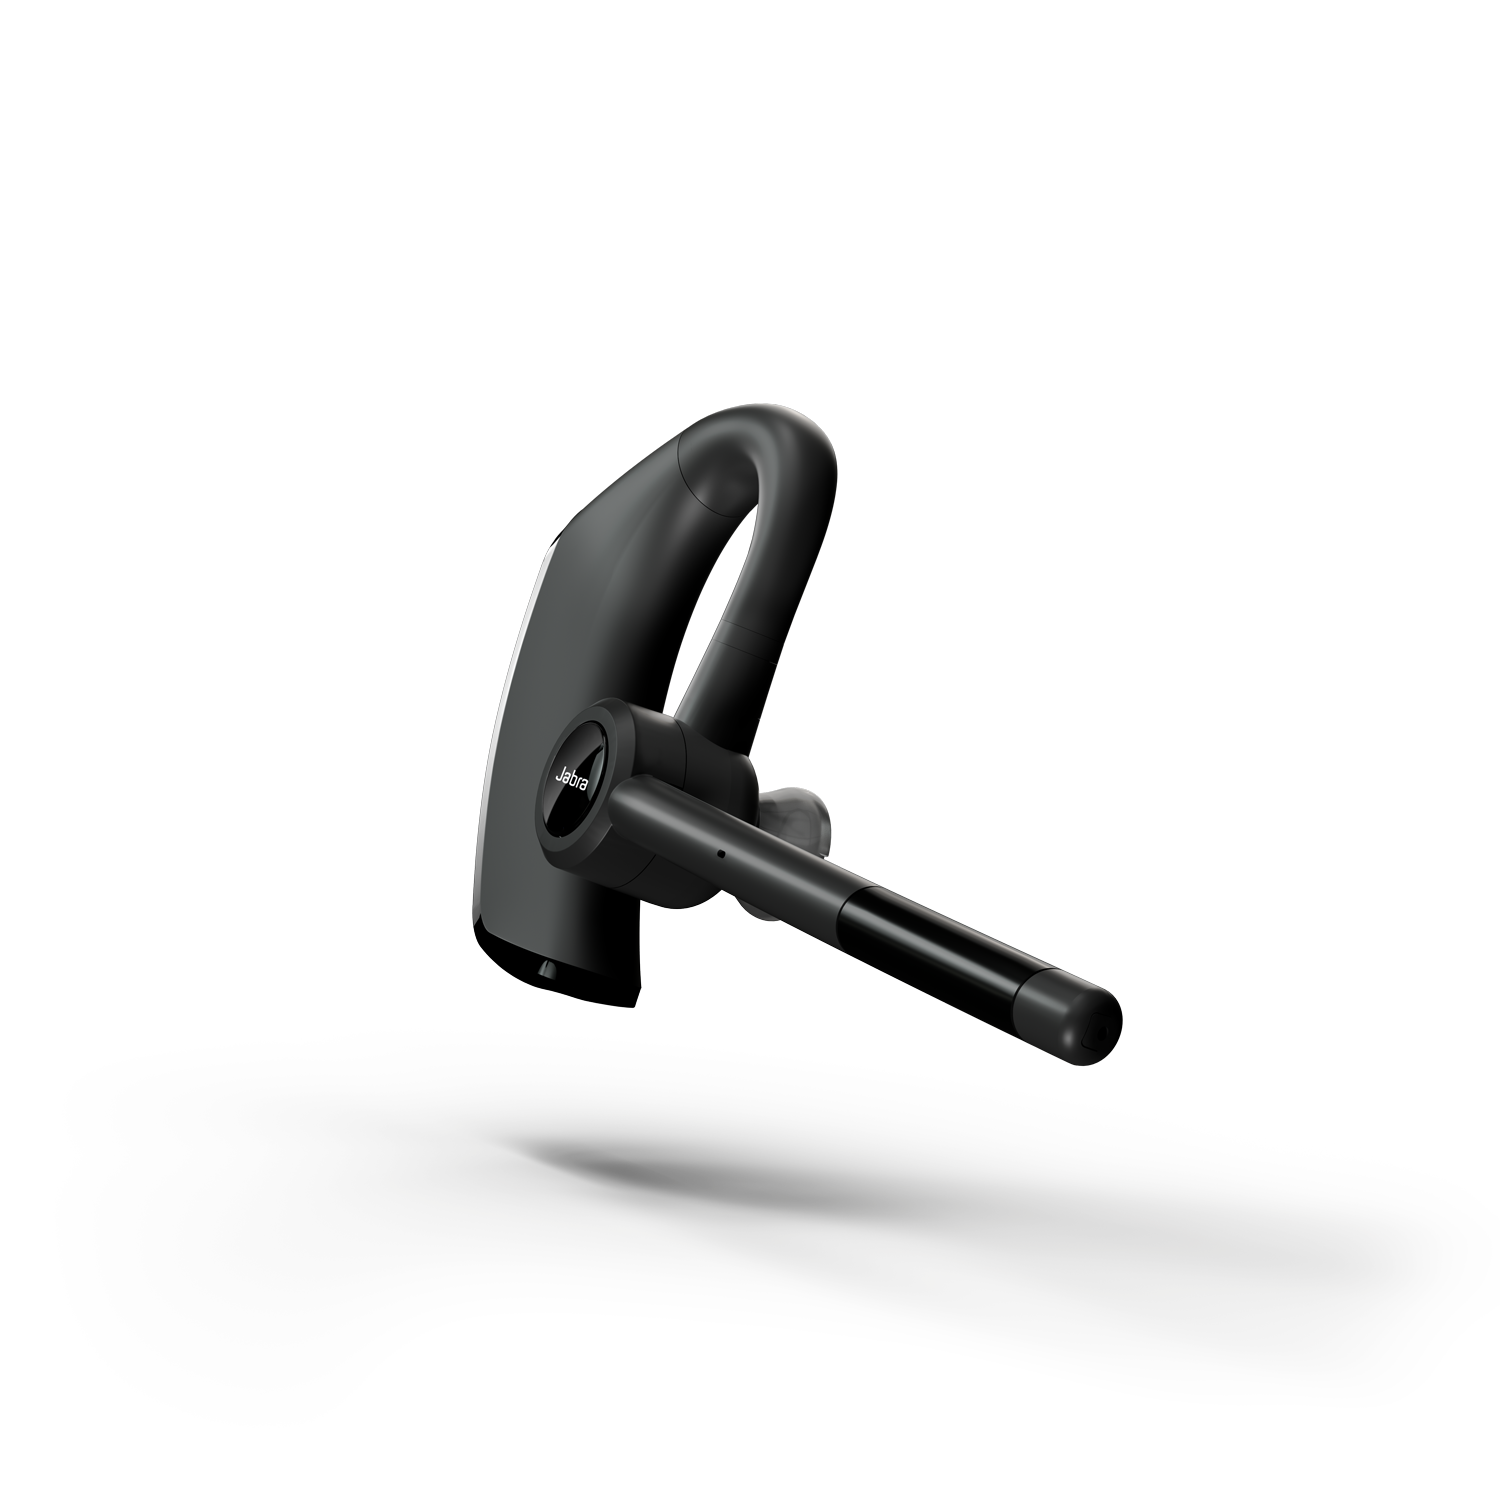 Premium Bluetooth® headset with 2 noise-cancelling microphones